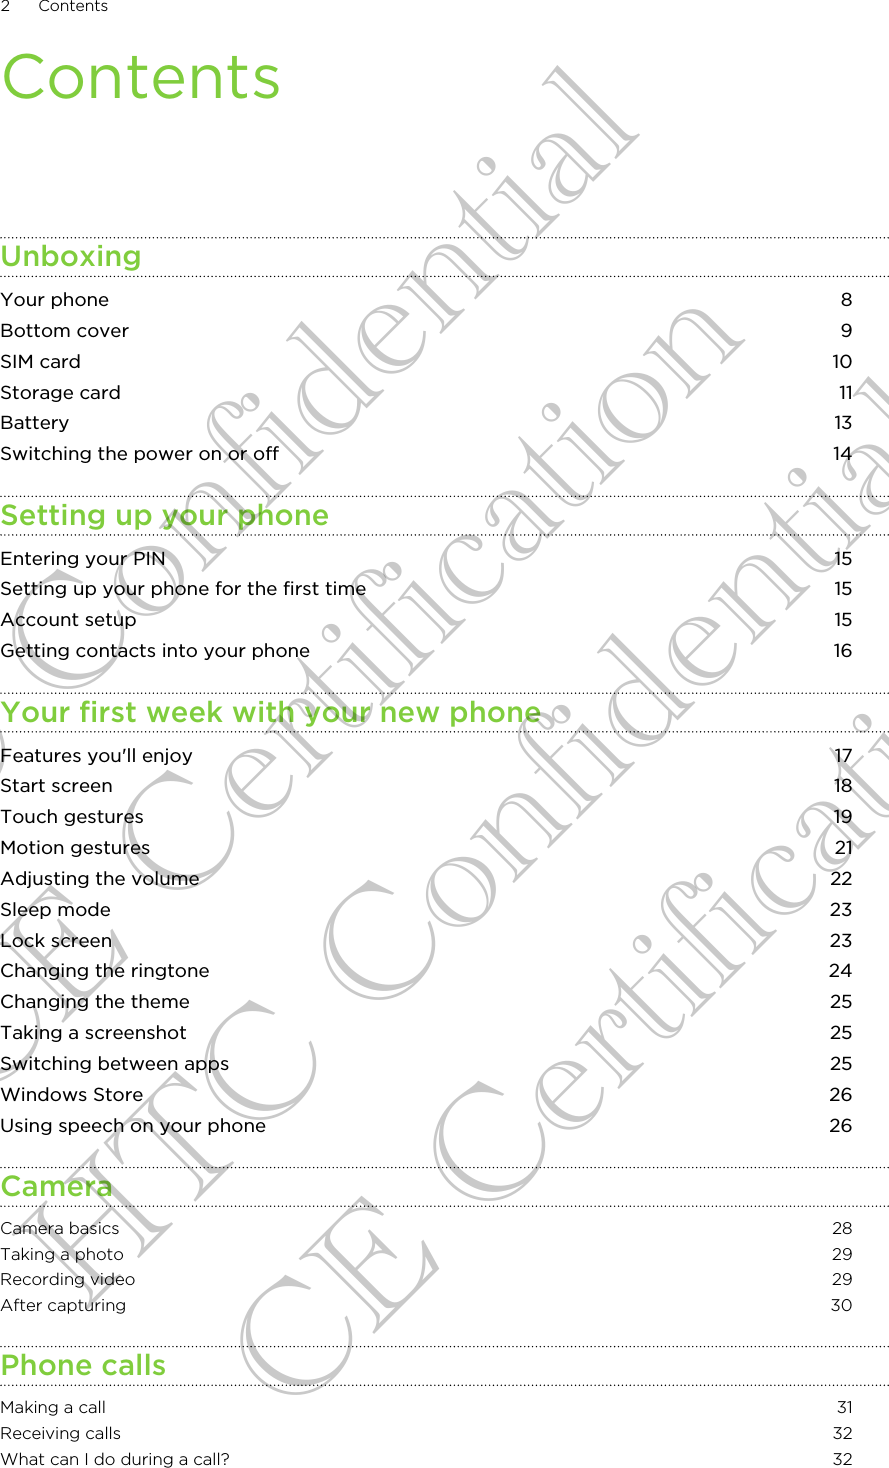 ContentsUnboxingYour phone 8Bottom cover 9SIM card 10Storage card 11Battery 13Switching the power on or off 14Setting up your phoneEntering your PIN 15Setting up your phone for the first time 15Account setup 15Getting contacts into your phone 16Your first week with your new phoneFeatures you&apos;ll enjoy 17Start screen 18Touch gestures 19Motion gestures 21Adjusting the volume 22Sleep mode 23Lock screen 23Changing the ringtone 24Changing the theme 25Taking a screenshot 25Switching between apps 25Windows Store 26Using speech on your phone 26CameraCamera basics 28Taking a photo 29Recording video 29After capturing 30Phone callsMaking a call 31Receiving calls 32What can I do during a call? 322 ContentsHTC Confidential CE Certification HTC Confidential CE Certification